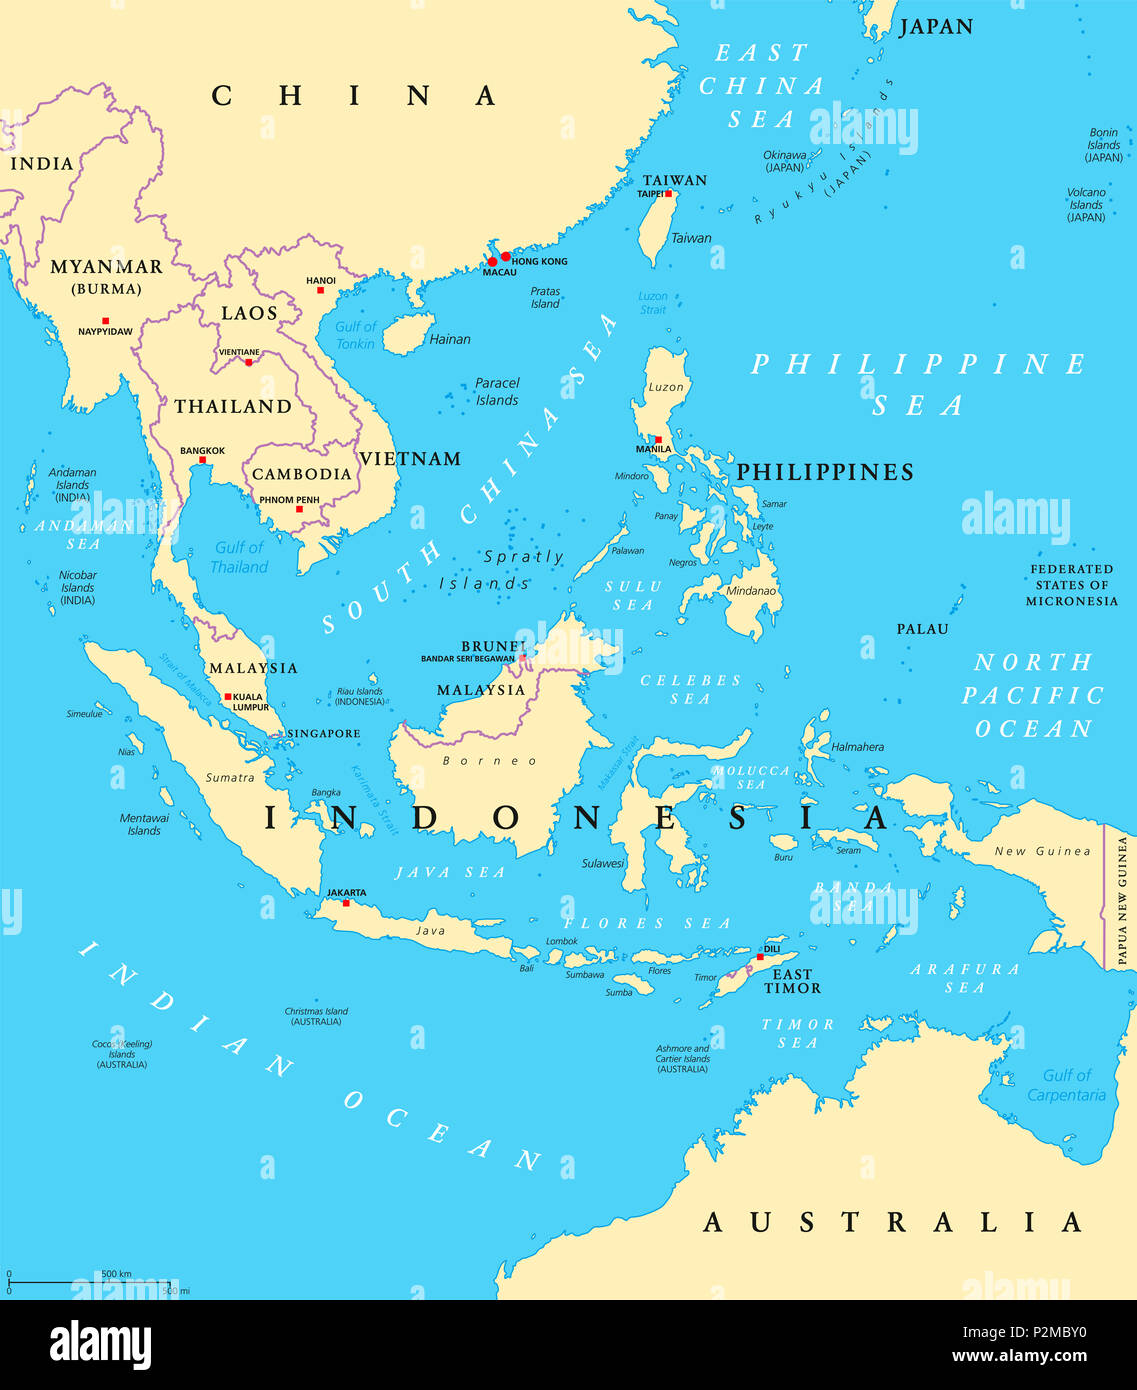 southeast-asia-political-map-with-capitals-and-borders-subregion-of-asia-english-labeling-illustration-P2MBY0.jpg